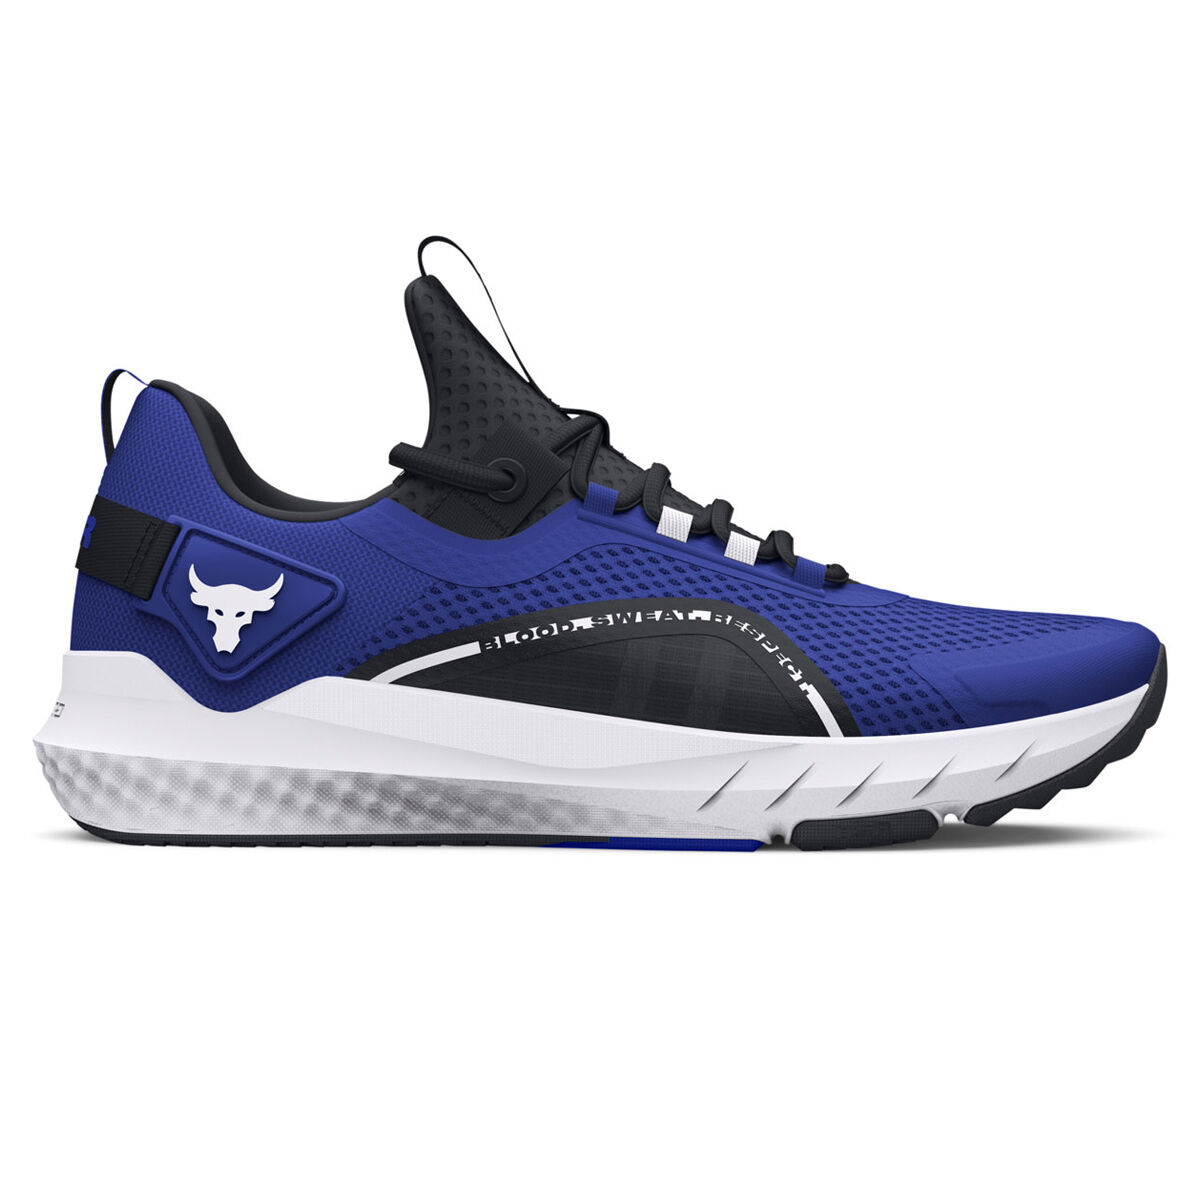 Under Armour Project Rock Bsr 3 Training Shoes in Blue for Men